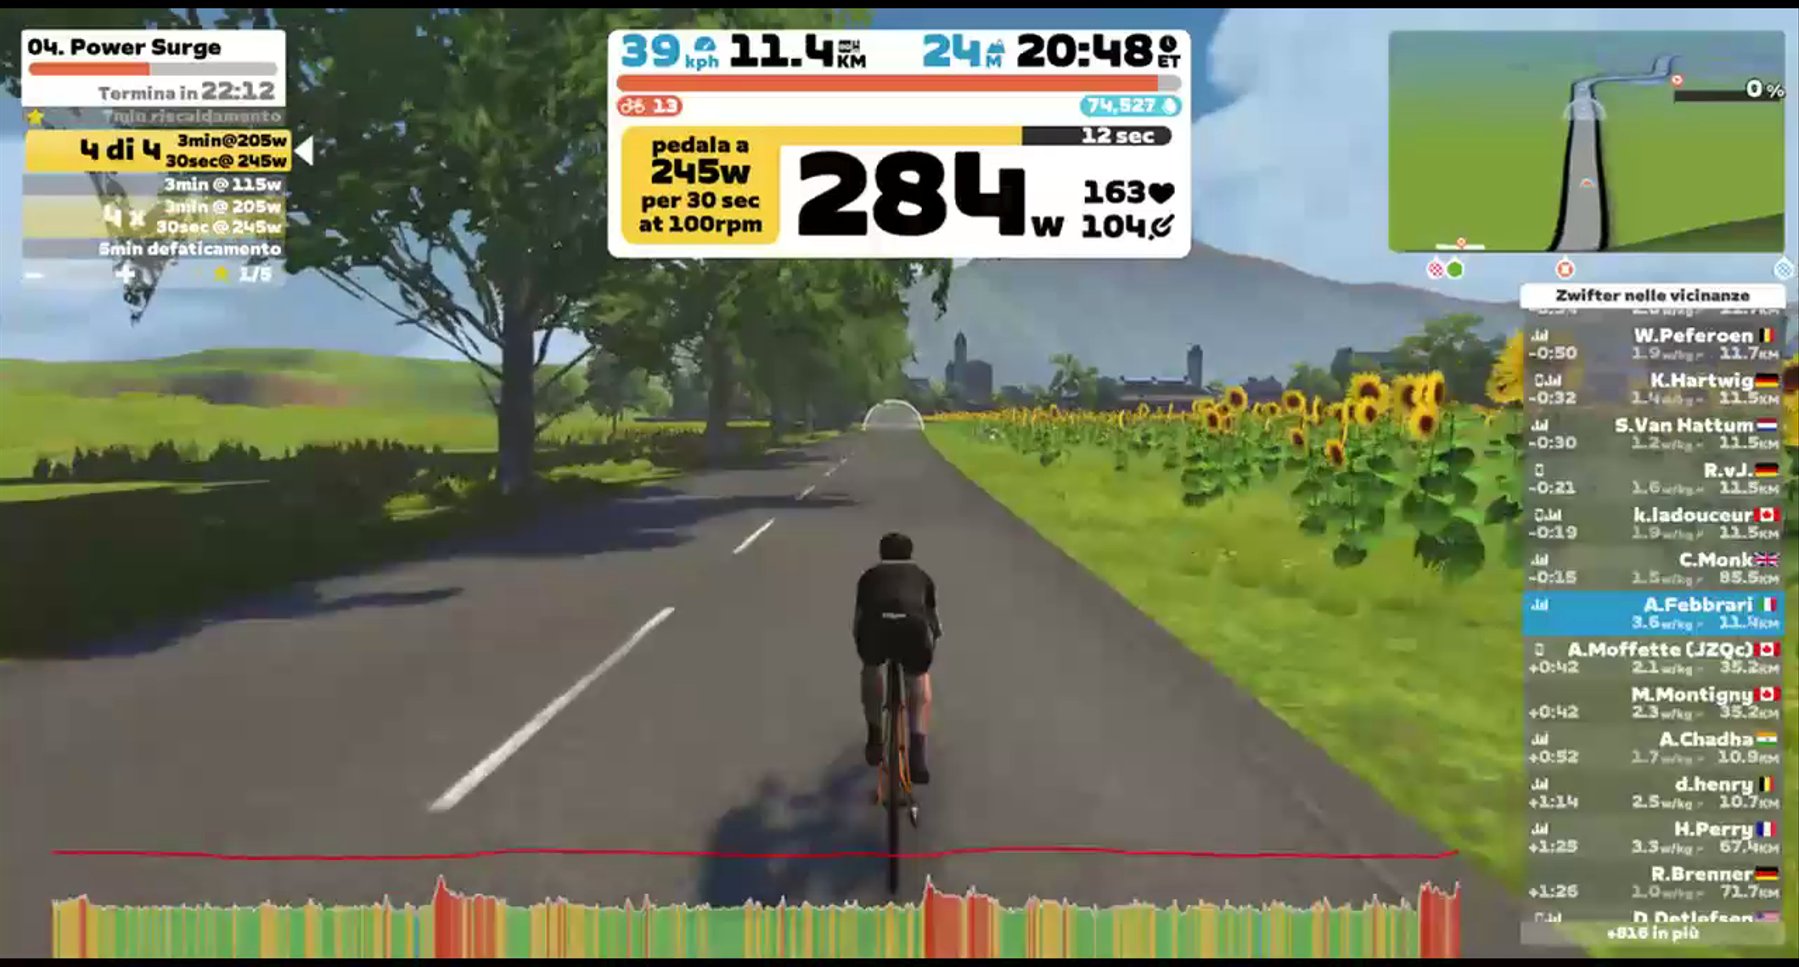 Zwift - 04. Power Surge in France